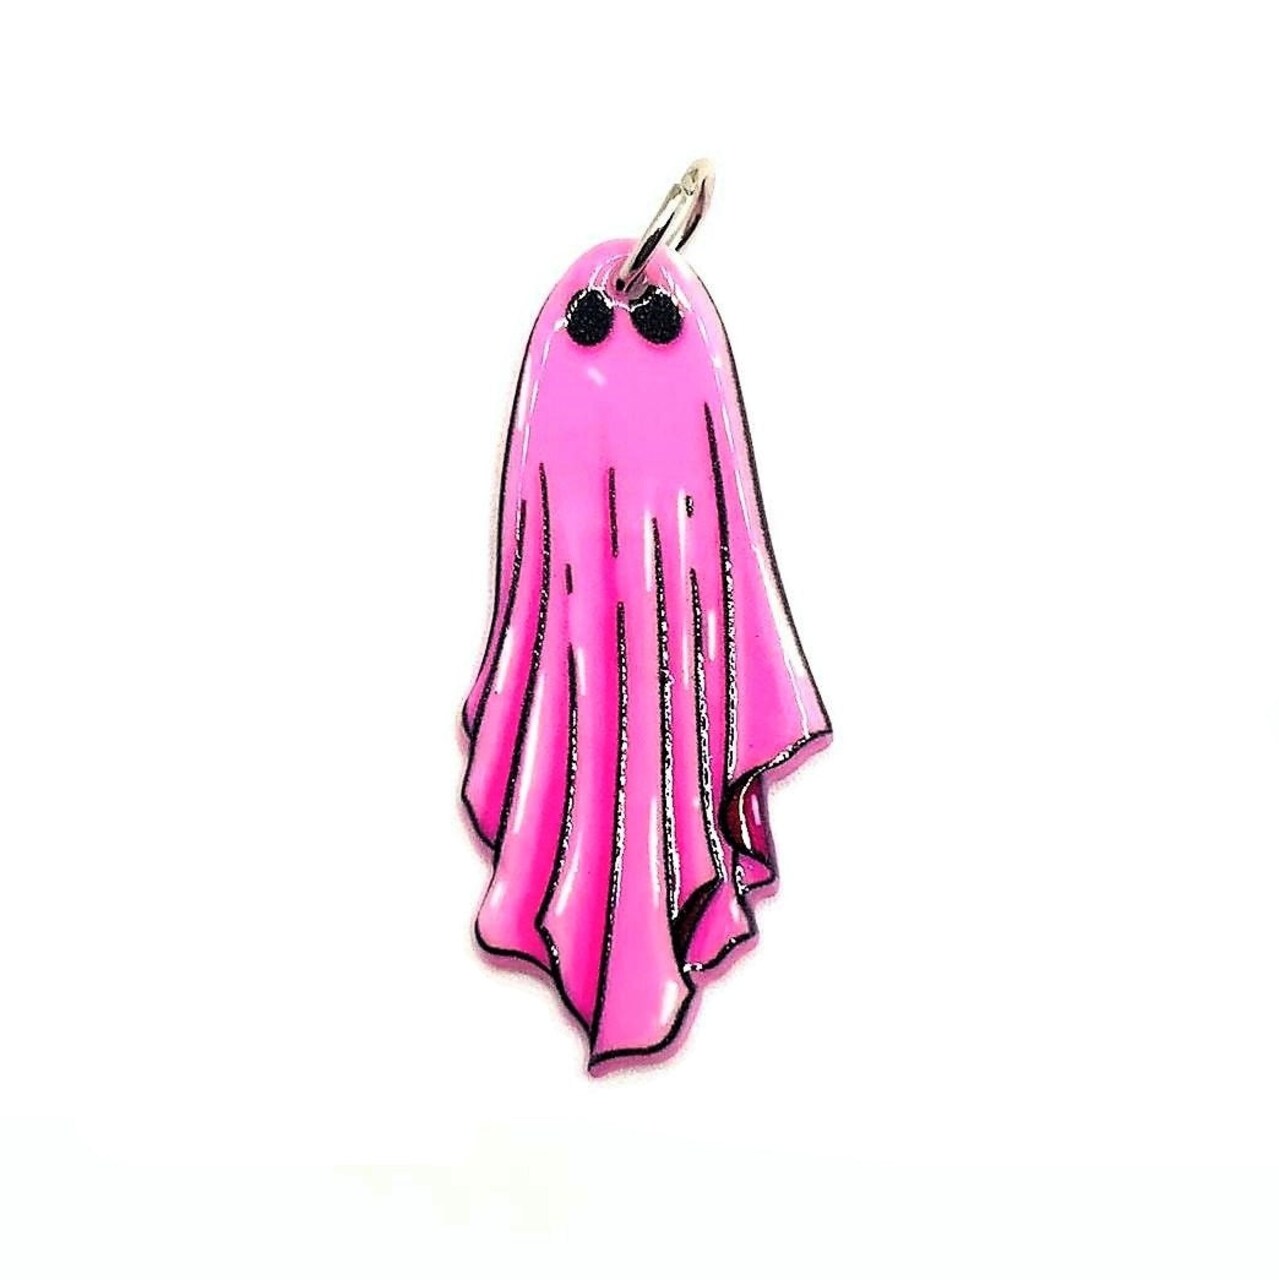 1, 4 or 20 Pieces: Pink Goth Ghost Halloween Charms - Double Sided